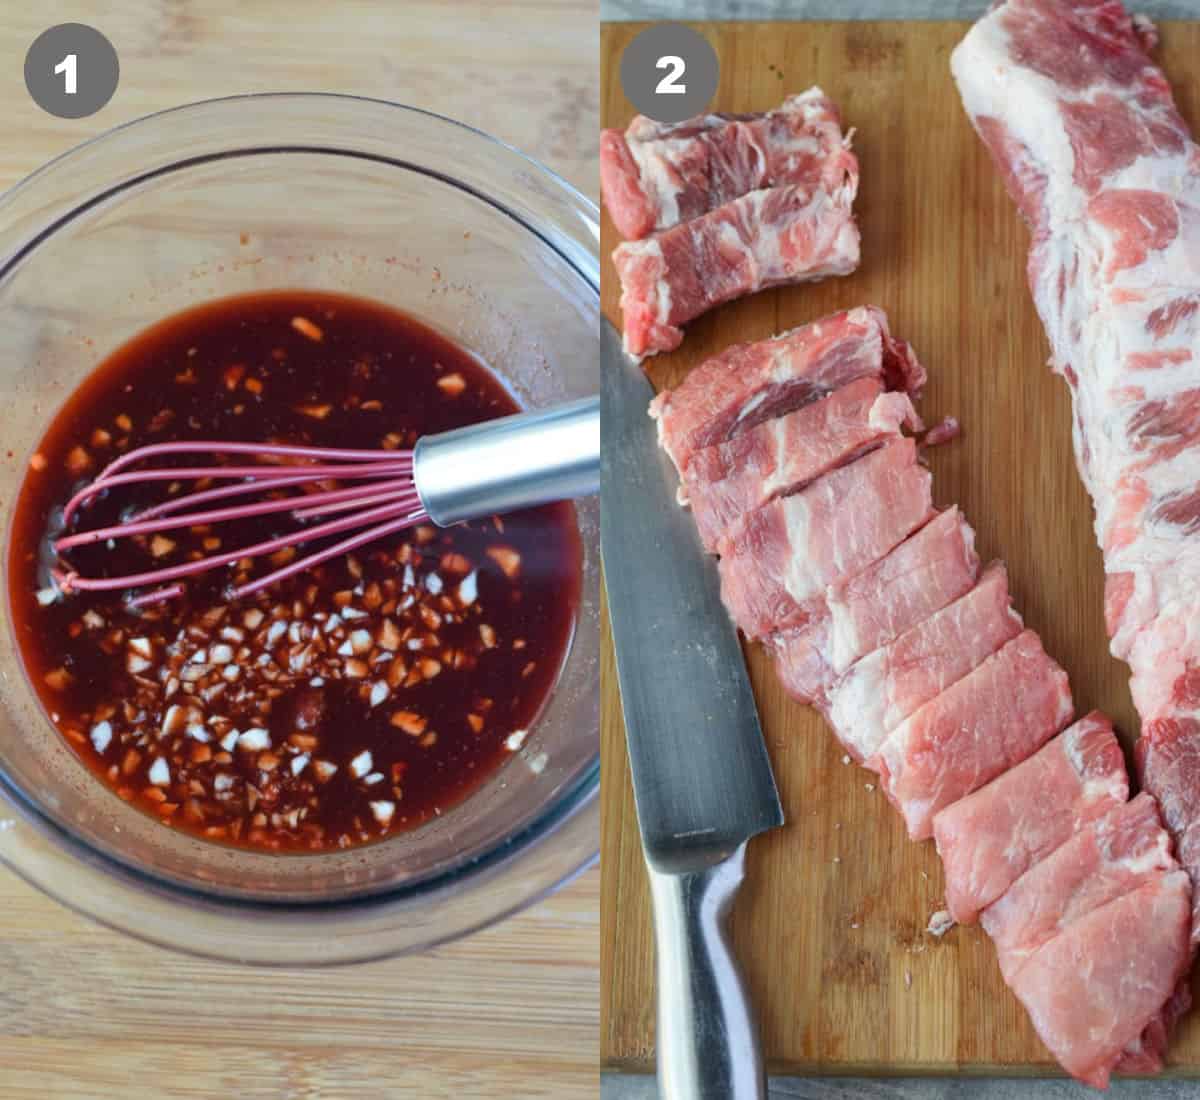 Sauce mixed in a small bowl and ribs cut up.